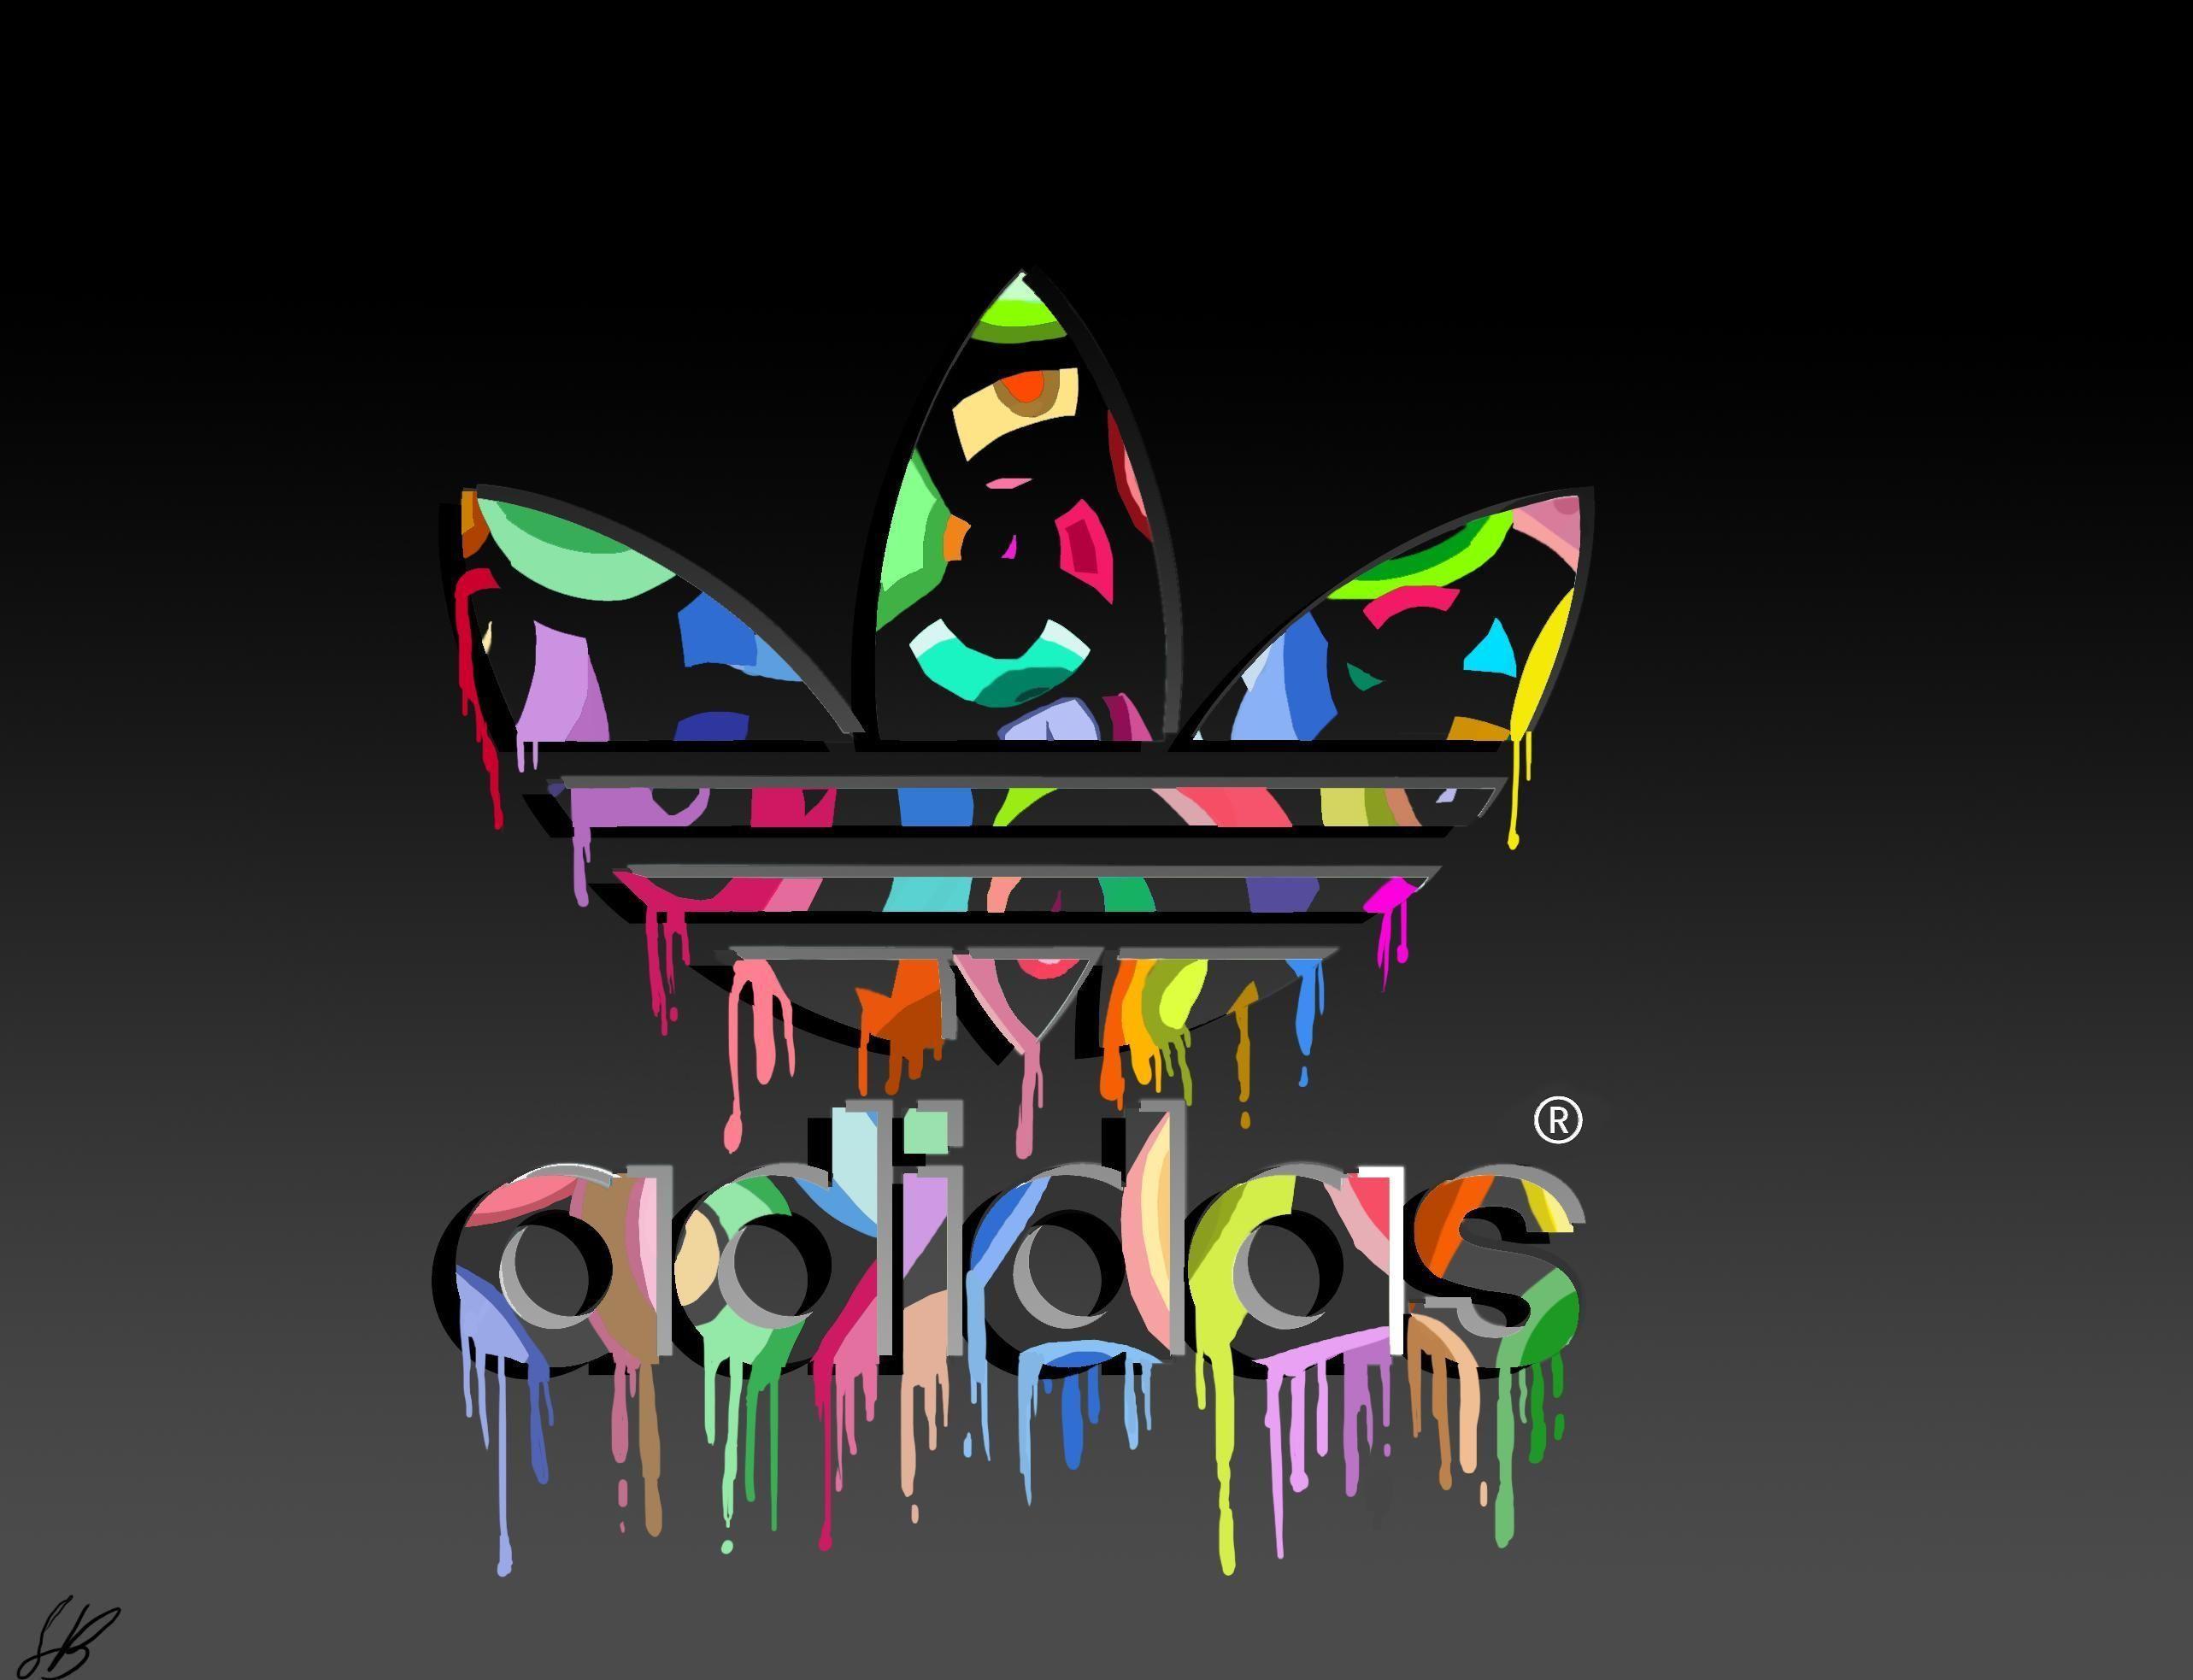 Cool Adidas Logo - Colorful Adidas Wallpaper 1080p Is Cool Wallpapers | ;lk in 2019 ...